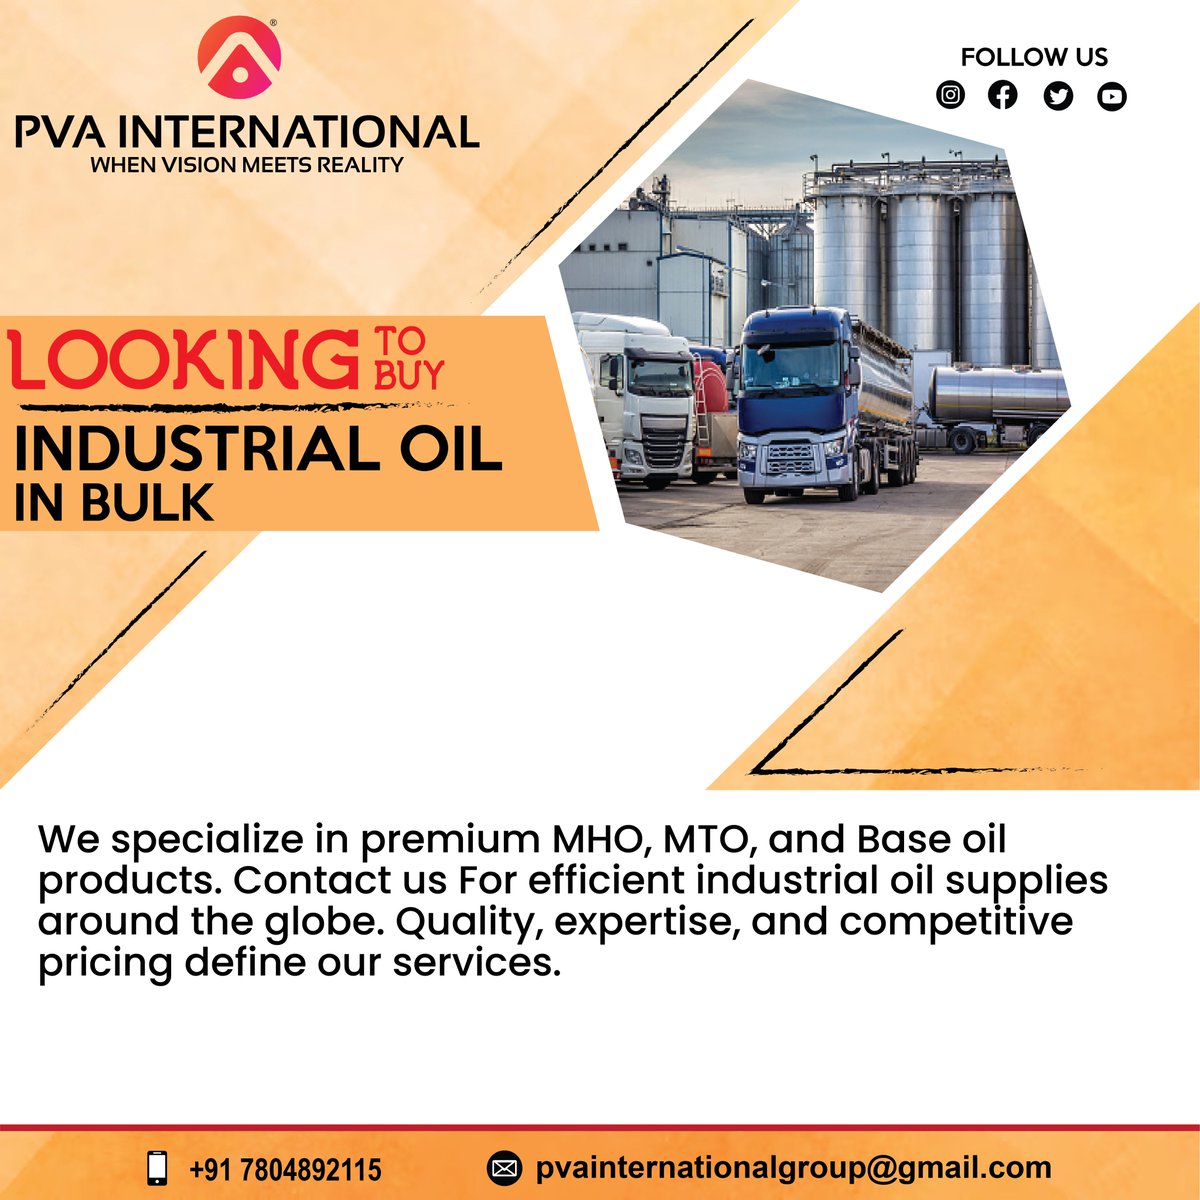 Reach out now for more details and place your order to fuel your business growth!

🤝Contact us today!
📞 Phone no: +91 7804892115

#BulkPurchase #IndustrialOil #EfficiencyMatters #FuelingSuccess #IndustrialOil #TrustedSupplier #SeamlessSupply #successjourney